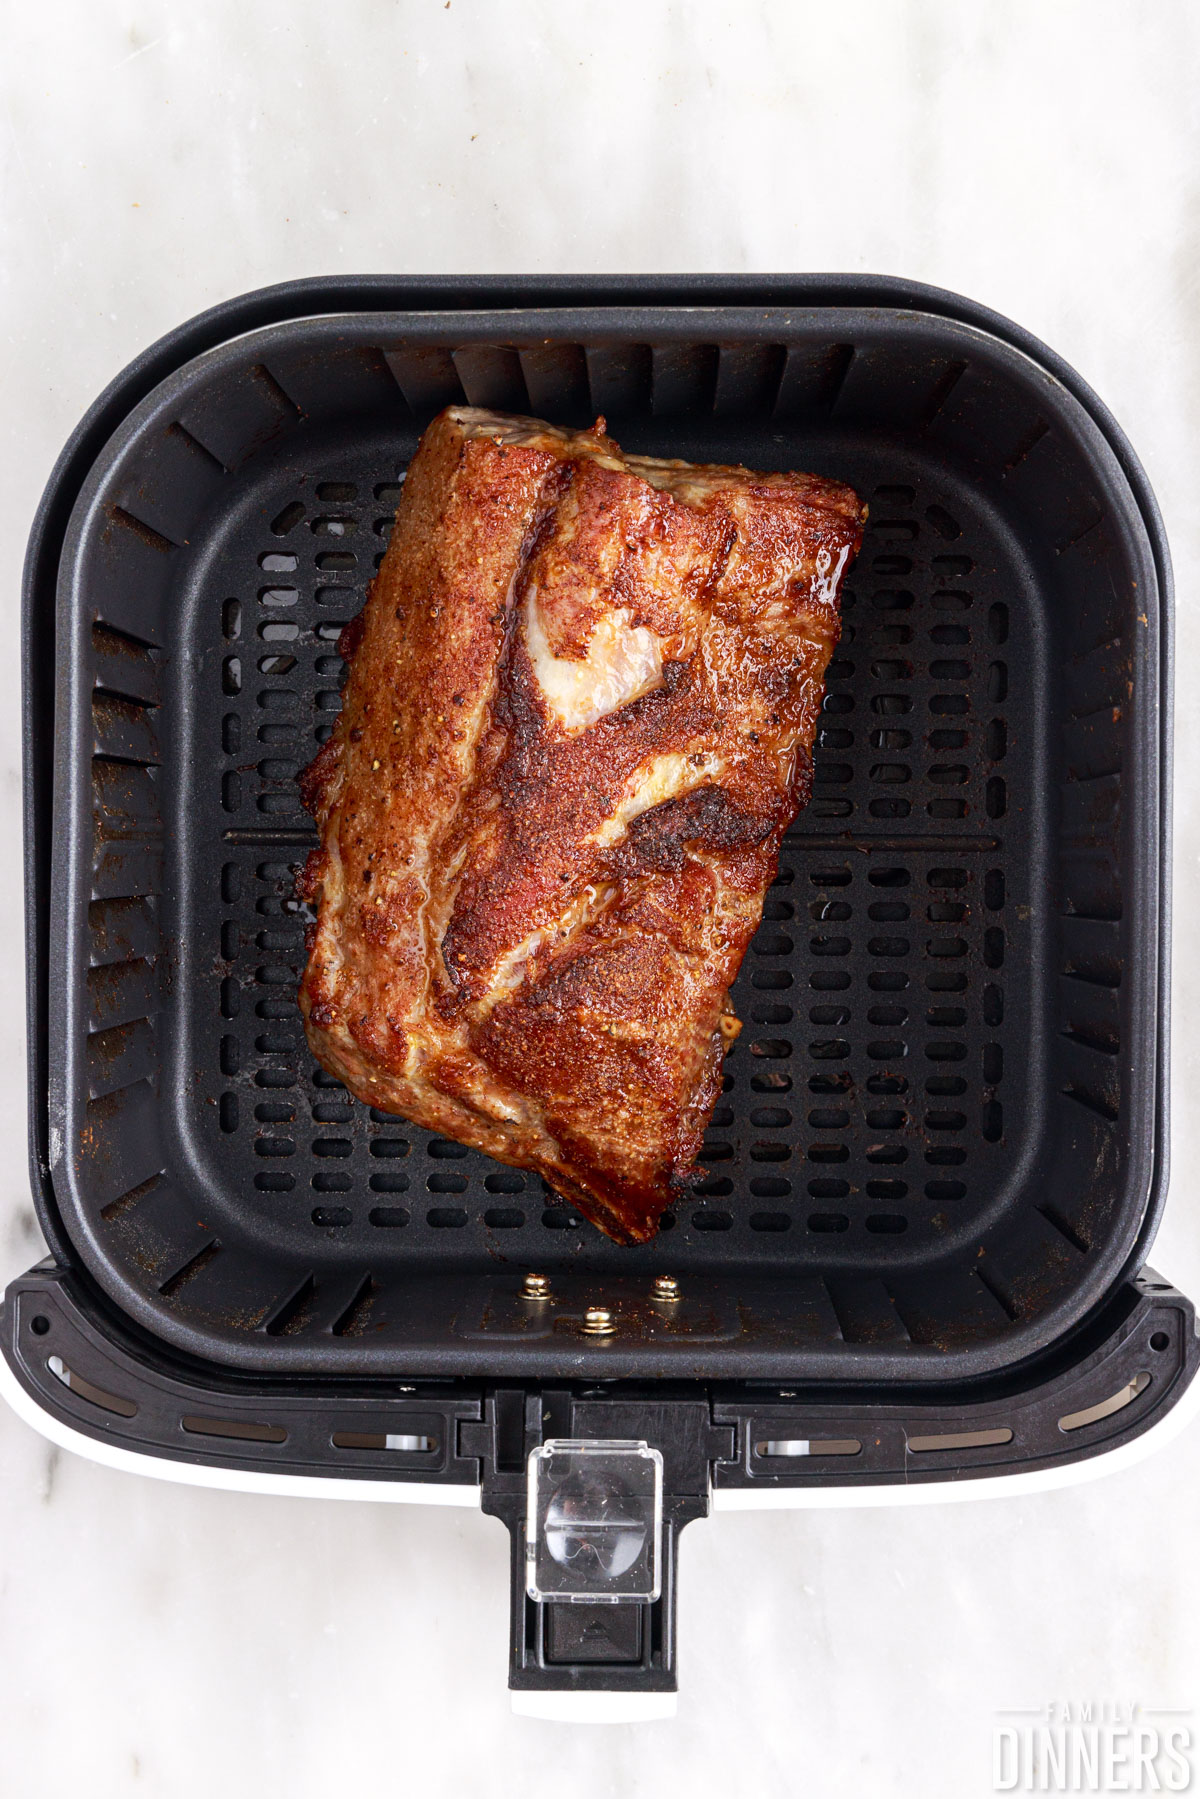 cooked ribs in the air fryer